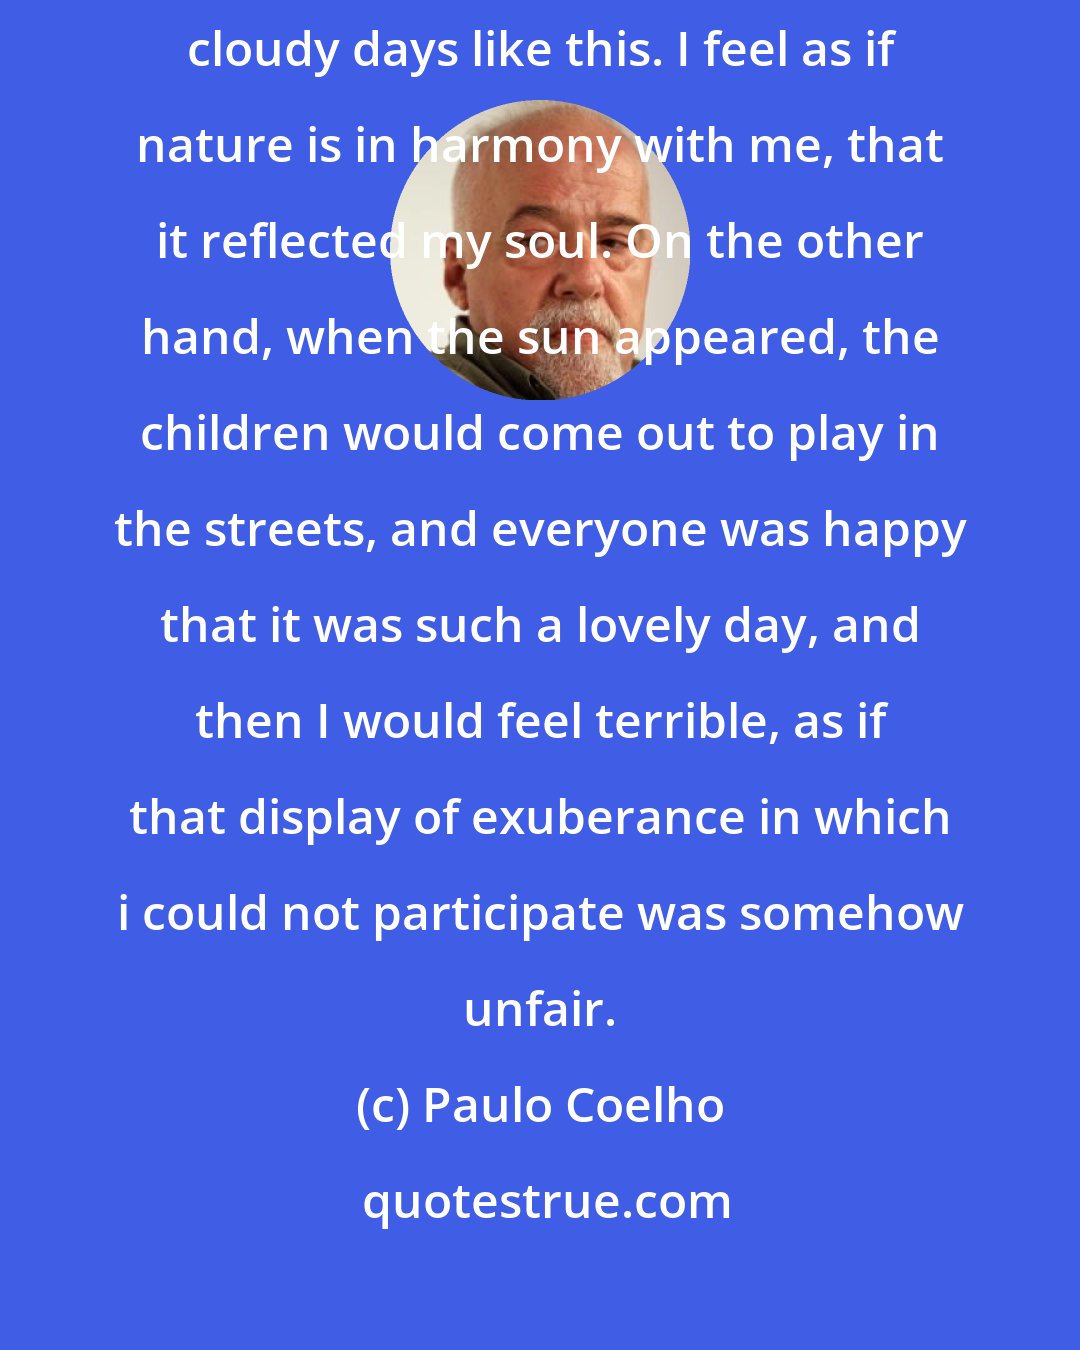 Paulo Coelho: Oddly enough I never used to suffer from depression on cold, gray, cloudy days like this. I feel as if nature is in harmony with me, that it reflected my soul. On the other hand, when the sun appeared, the children would come out to play in the streets, and everyone was happy that it was such a lovely day, and then I would feel terrible, as if that display of exuberance in which i could not participate was somehow unfair.